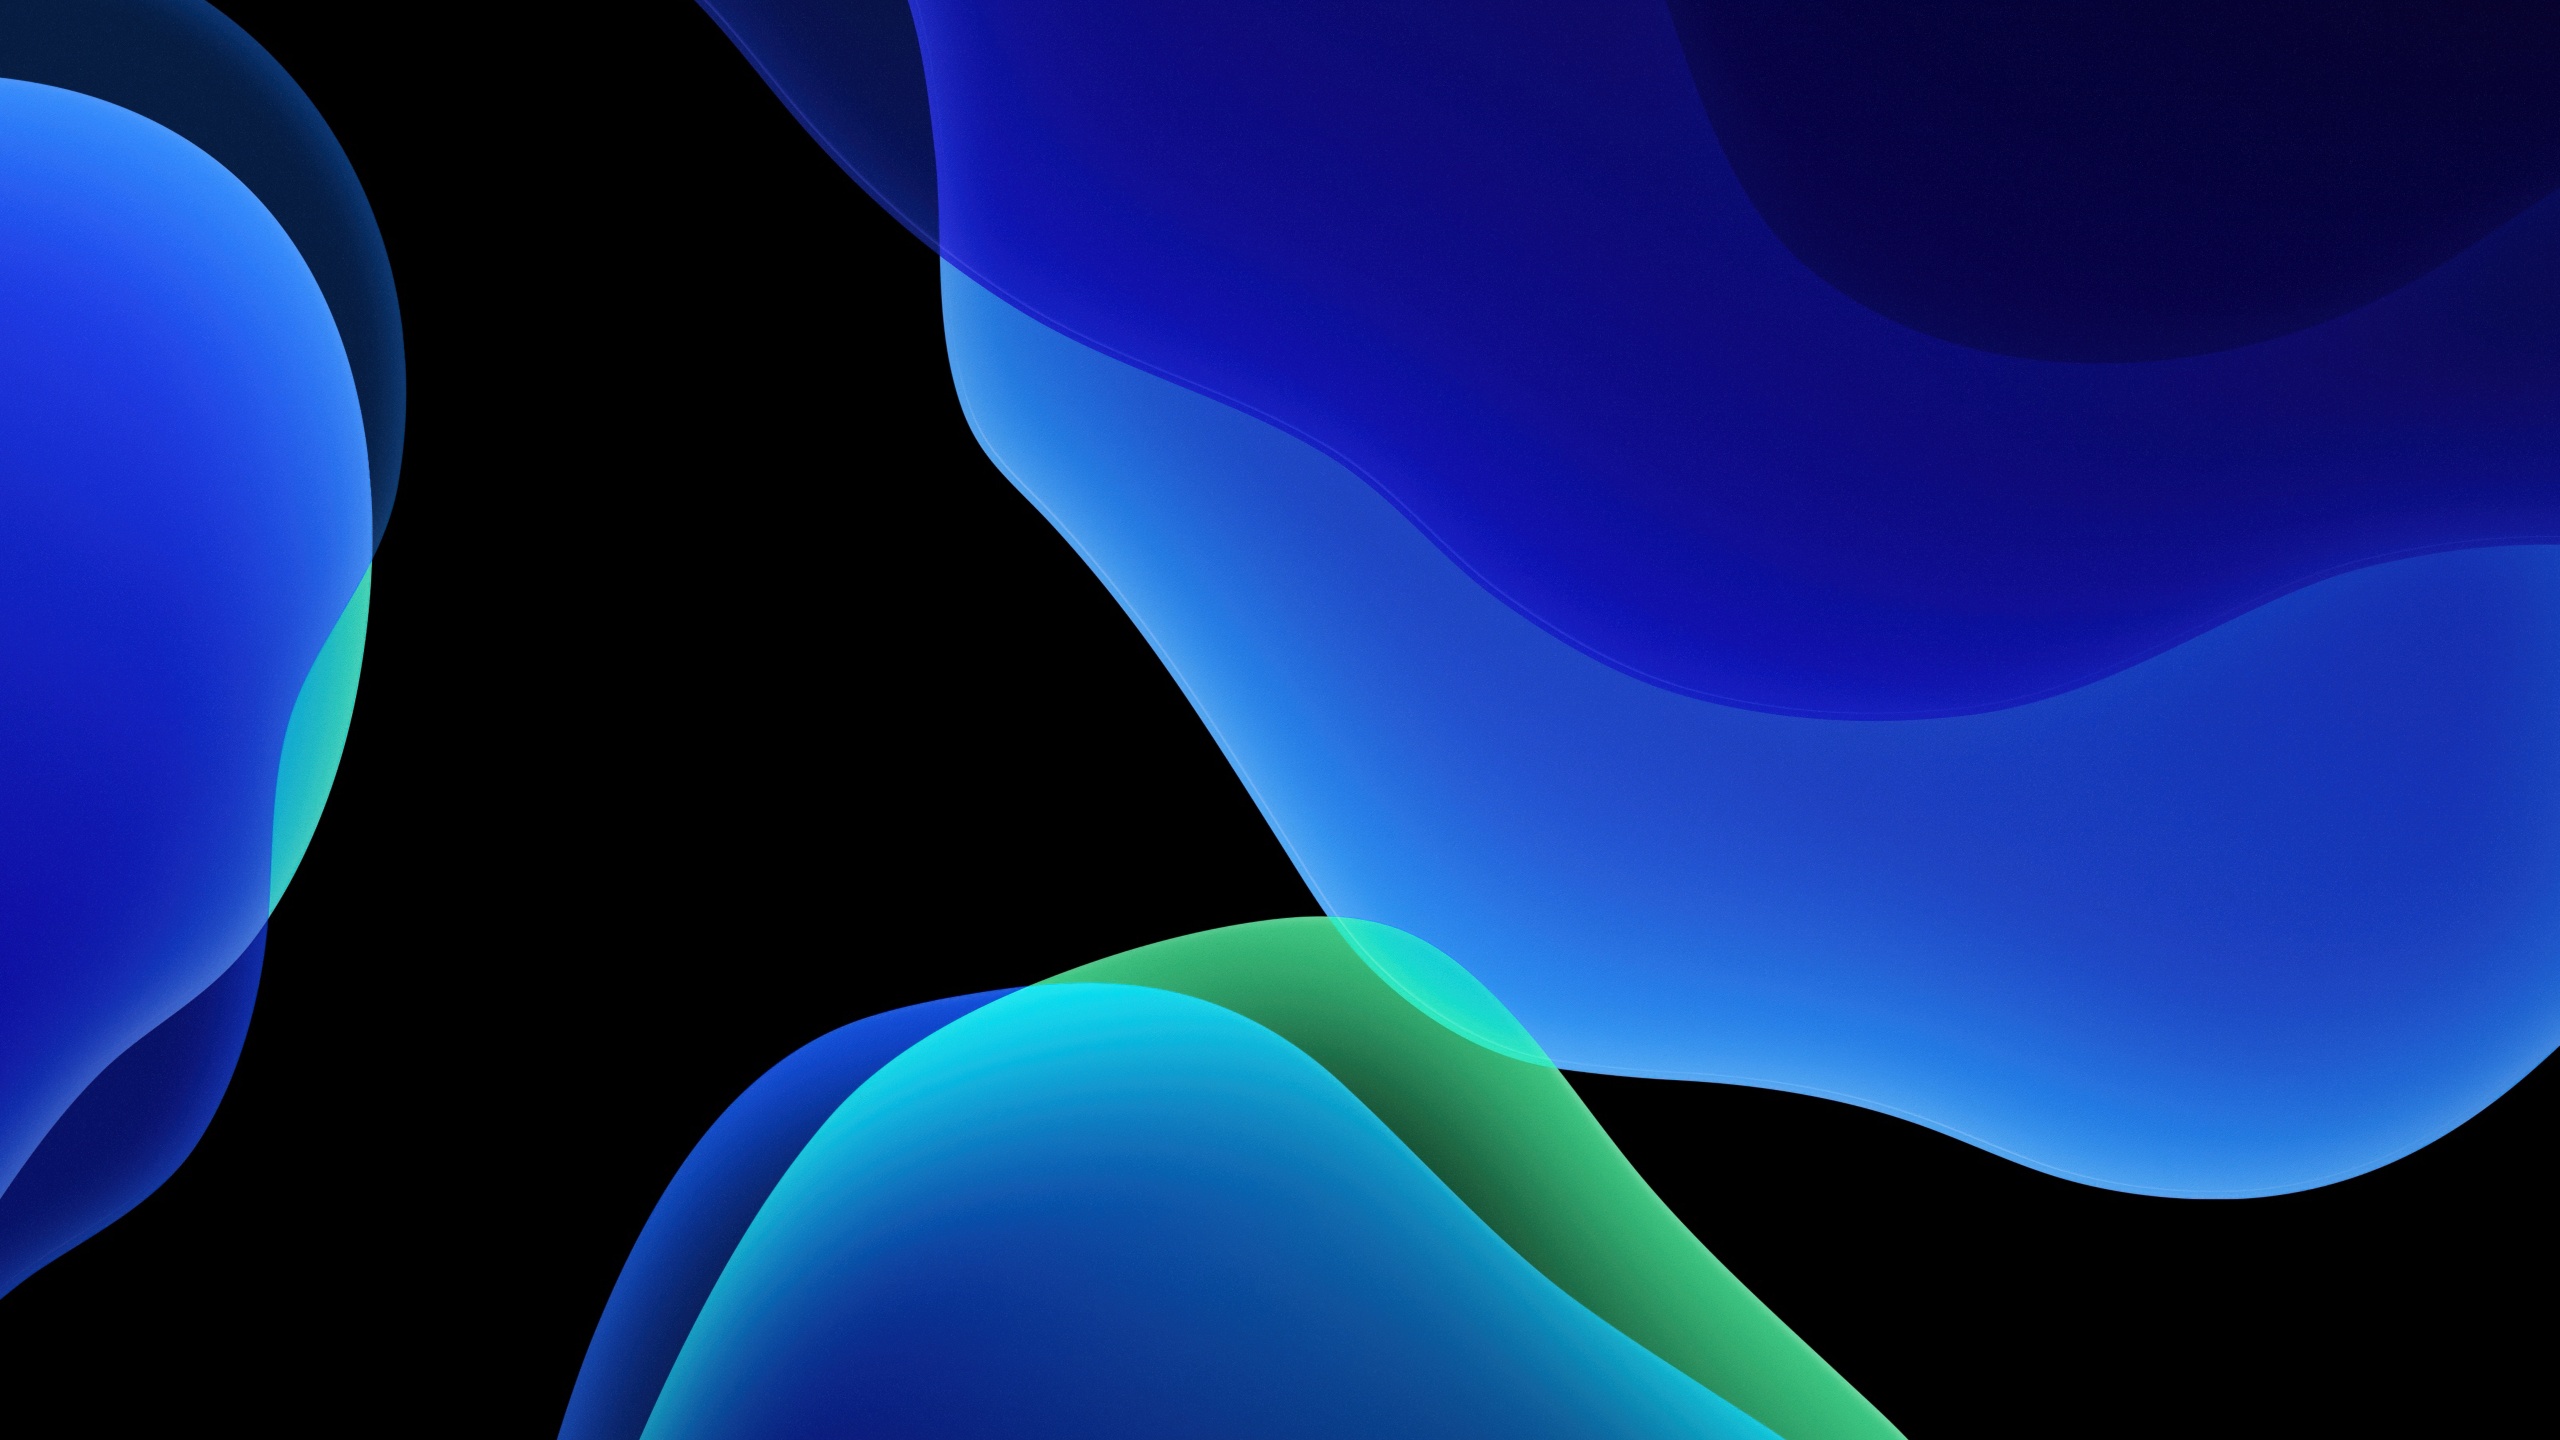 Amoled Wallpaper 4k Desktop 4k Amoled Wallpaper For Iphone Iphone Wallpaper If You Are Looking For Amoled Wallpaper 4k For Pc You Have Come To The Right Place Vtyuip